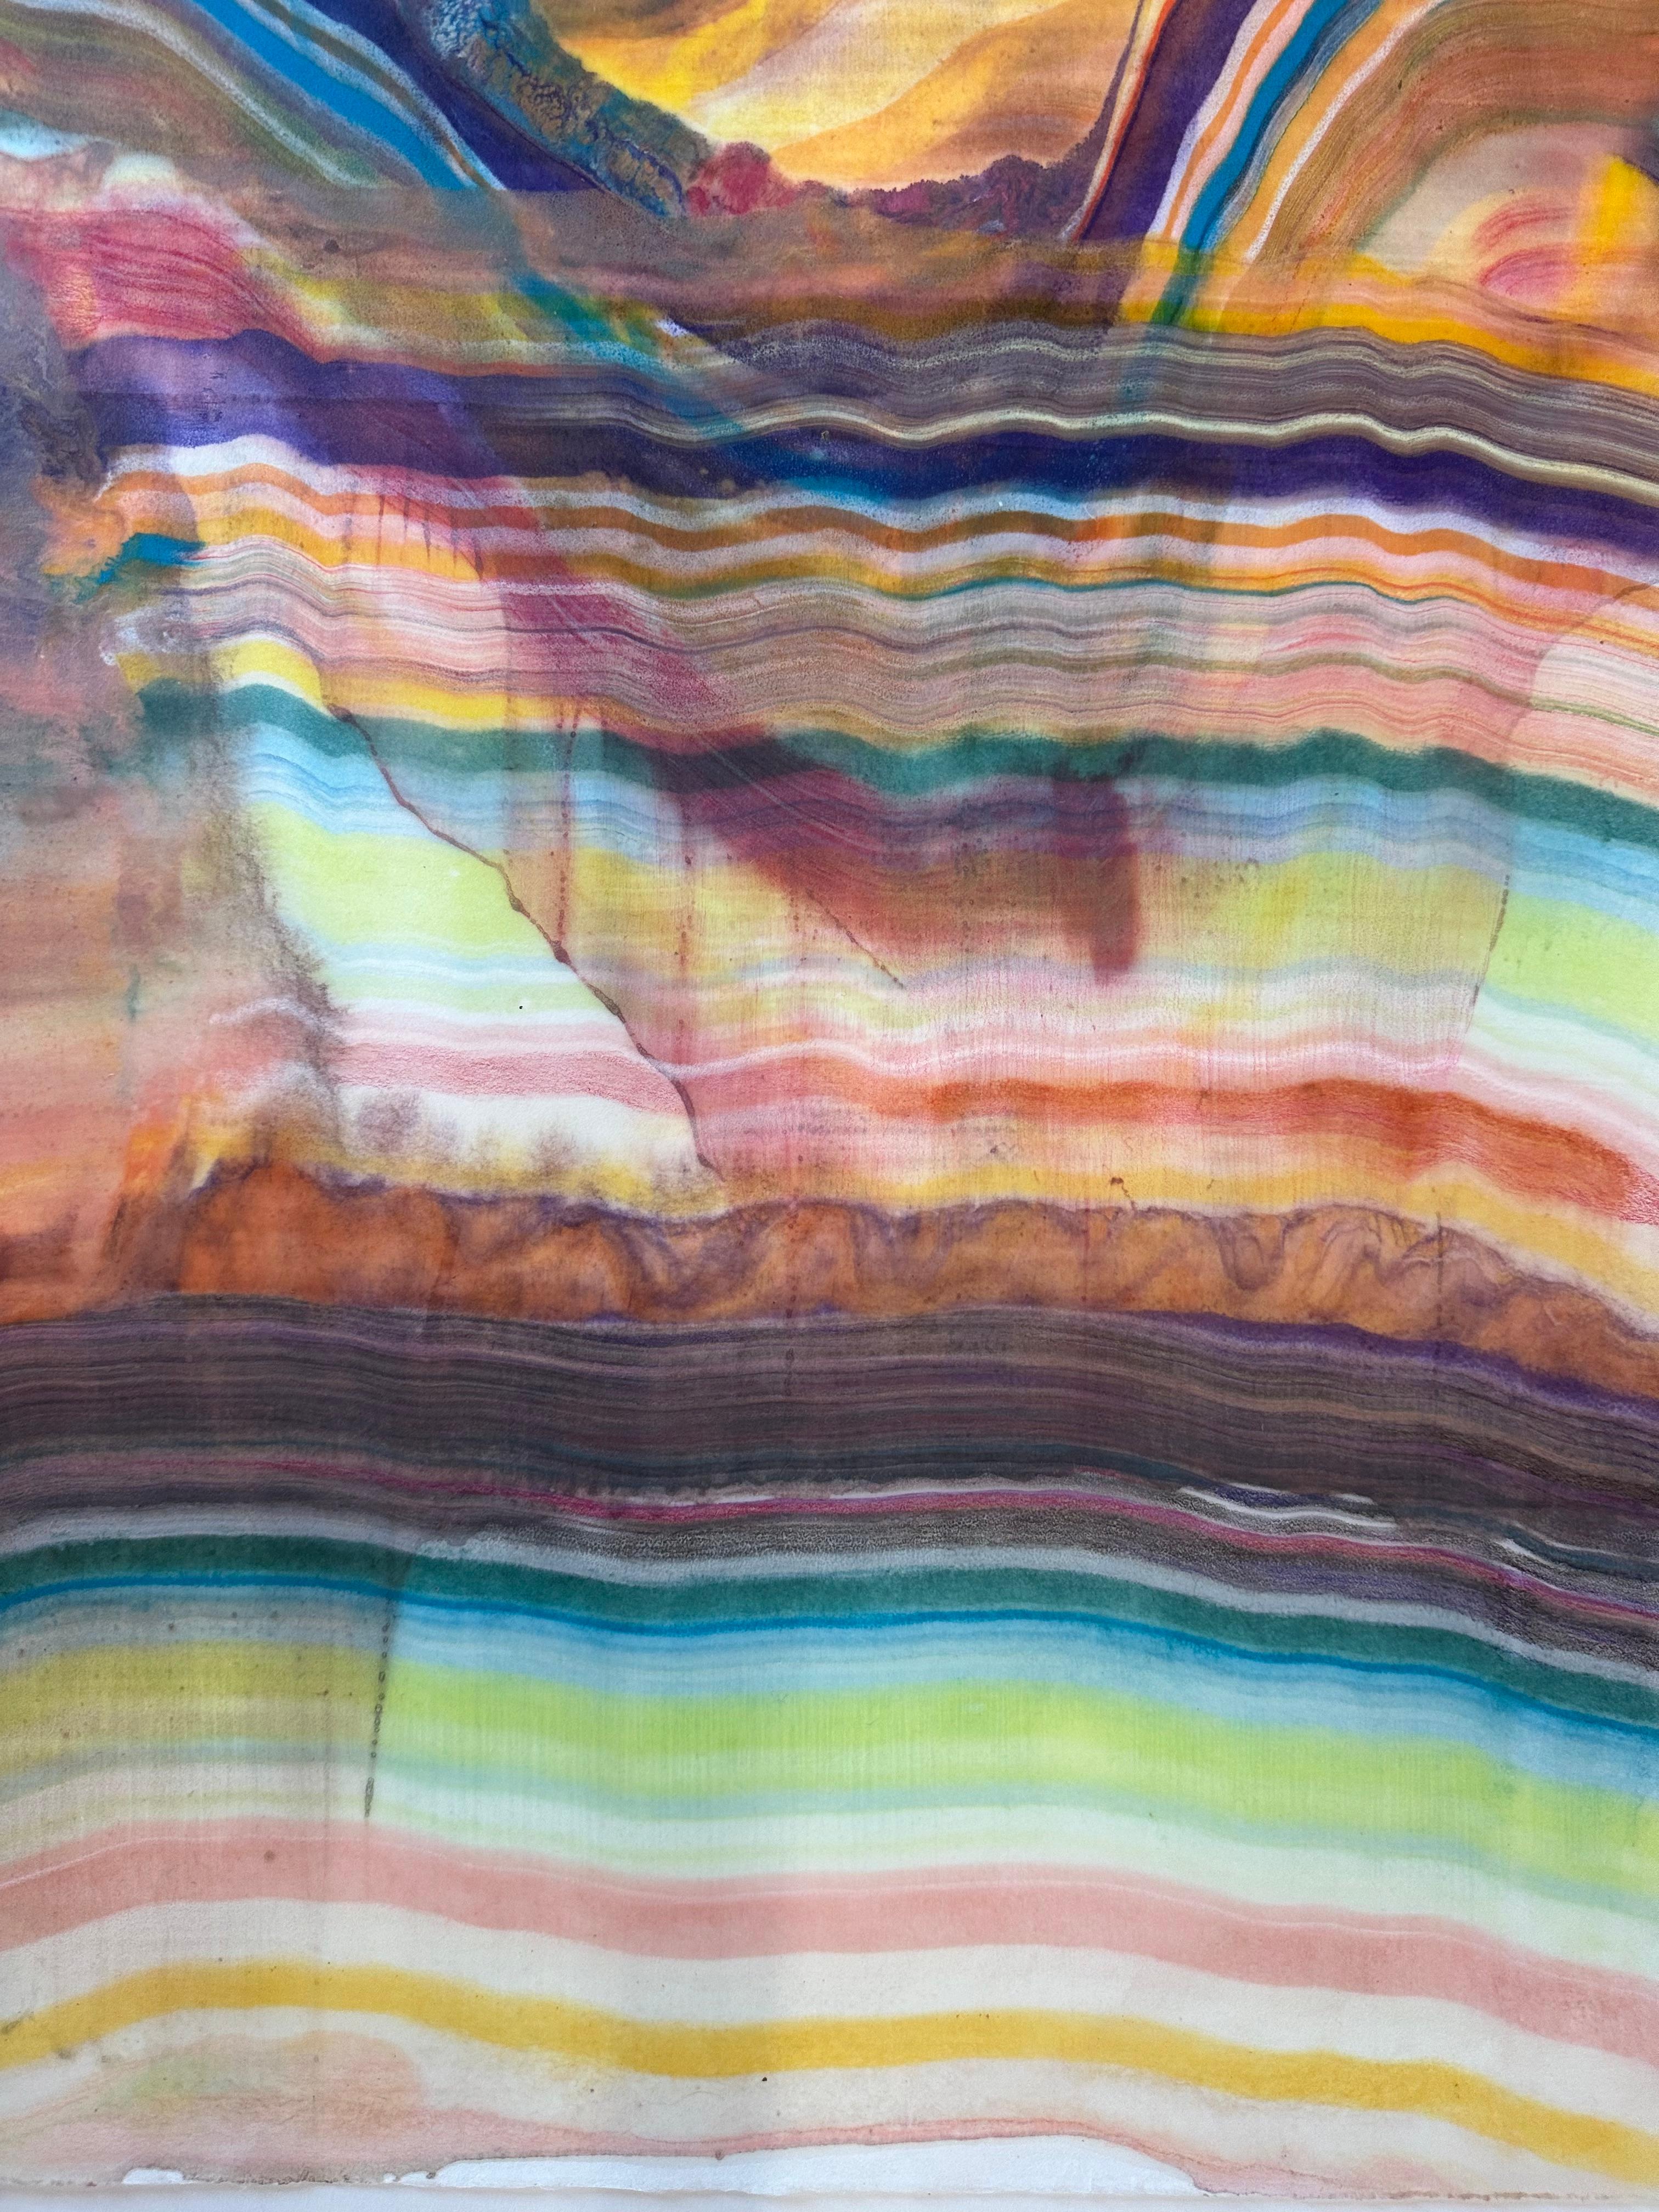 Laura Moriarty's Talking to Rocks 3 is a multicolored encaustic monotype on kozo paper. Layers of pigmented beeswax on lightweight paper create an undulating composition suggesting layers of the earth's crust and geological formations in orange,